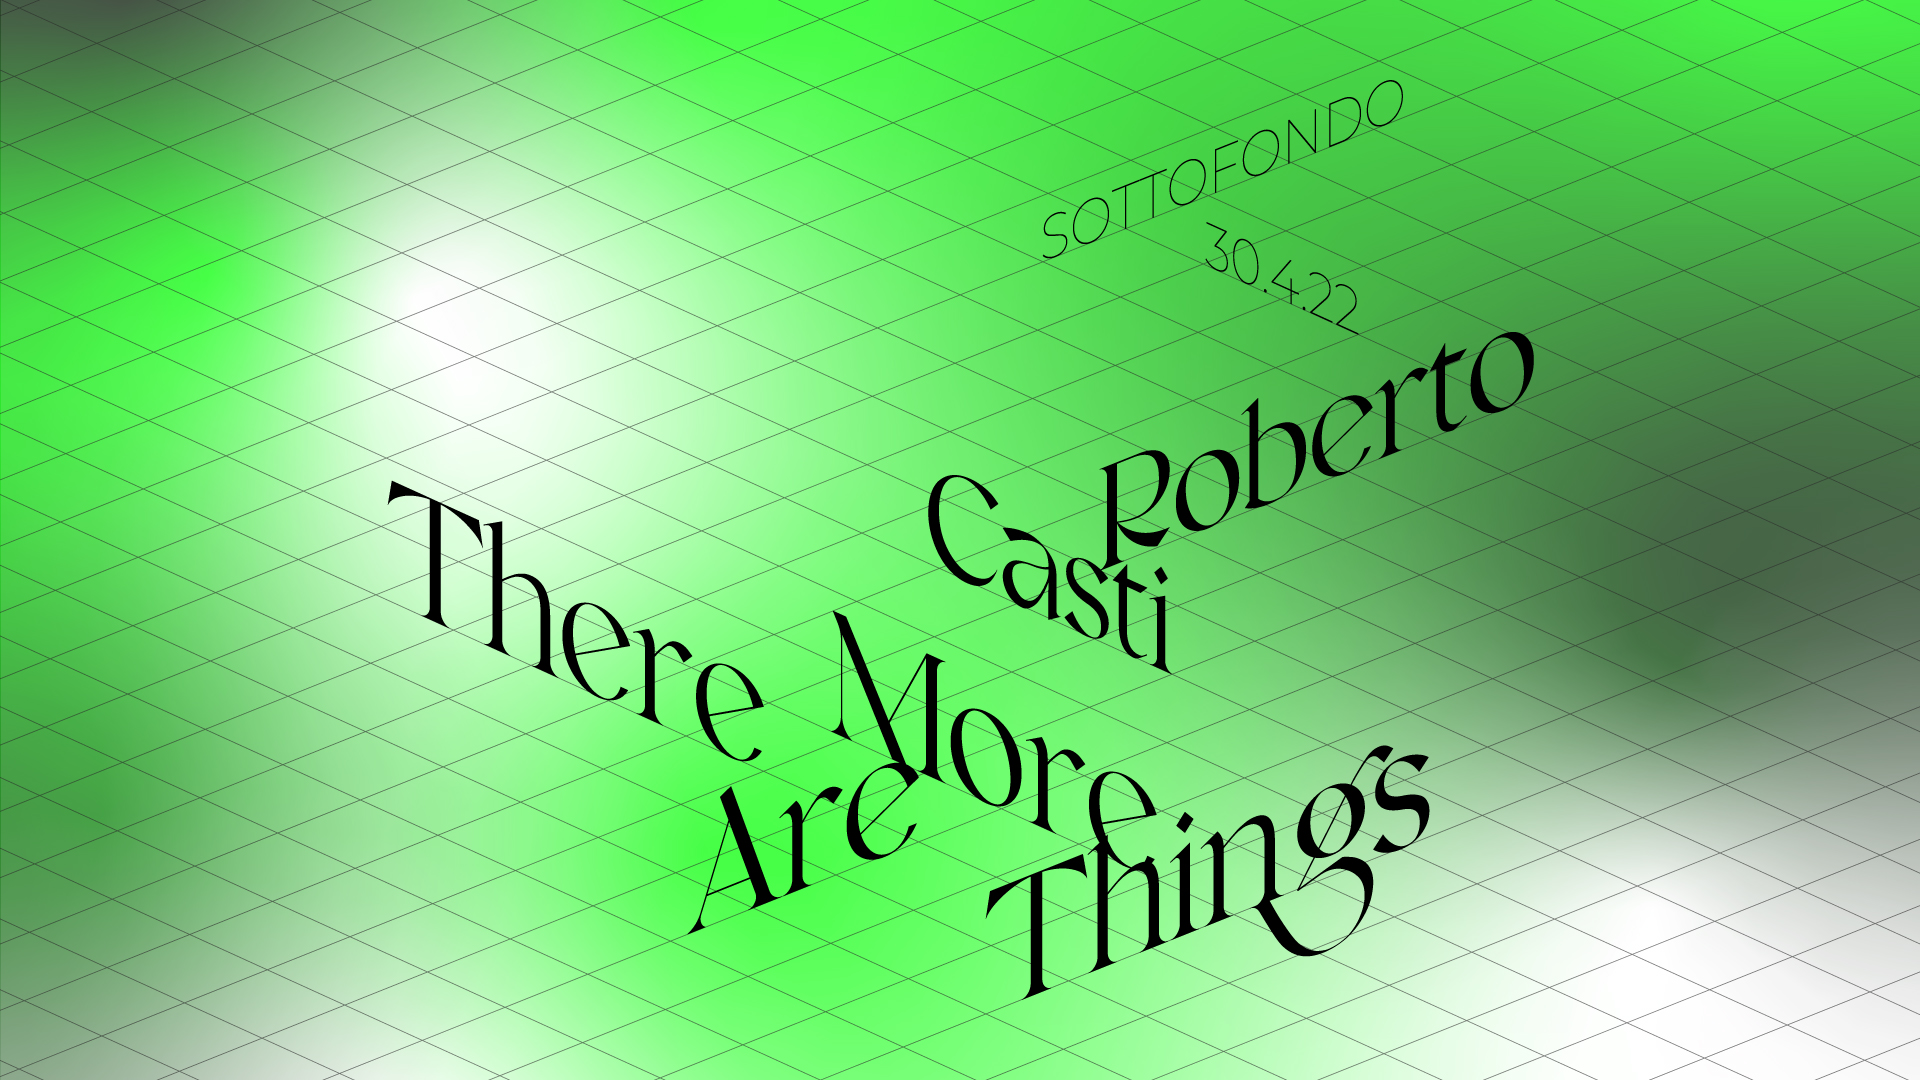 there are more things roberto casti